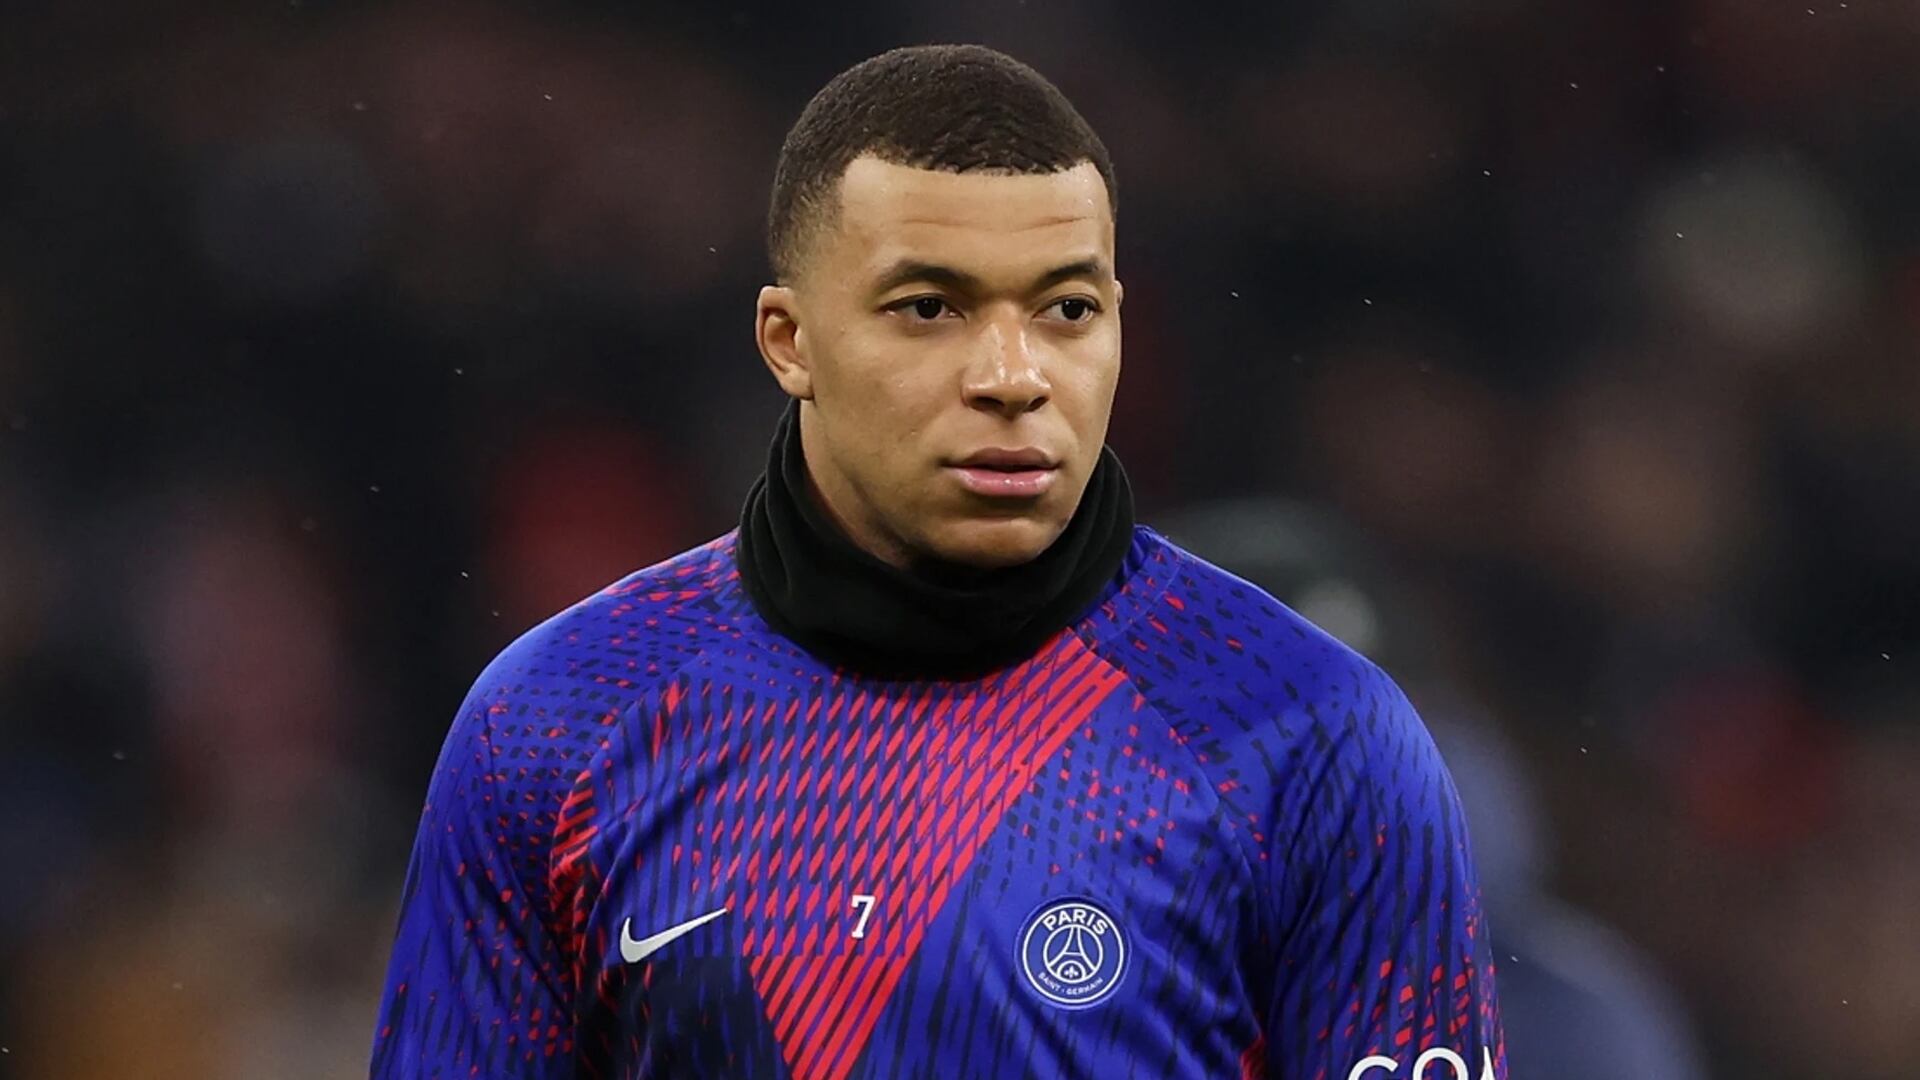 Increasingly further away, Mbappe's future does not ensure his arrival in Madrid